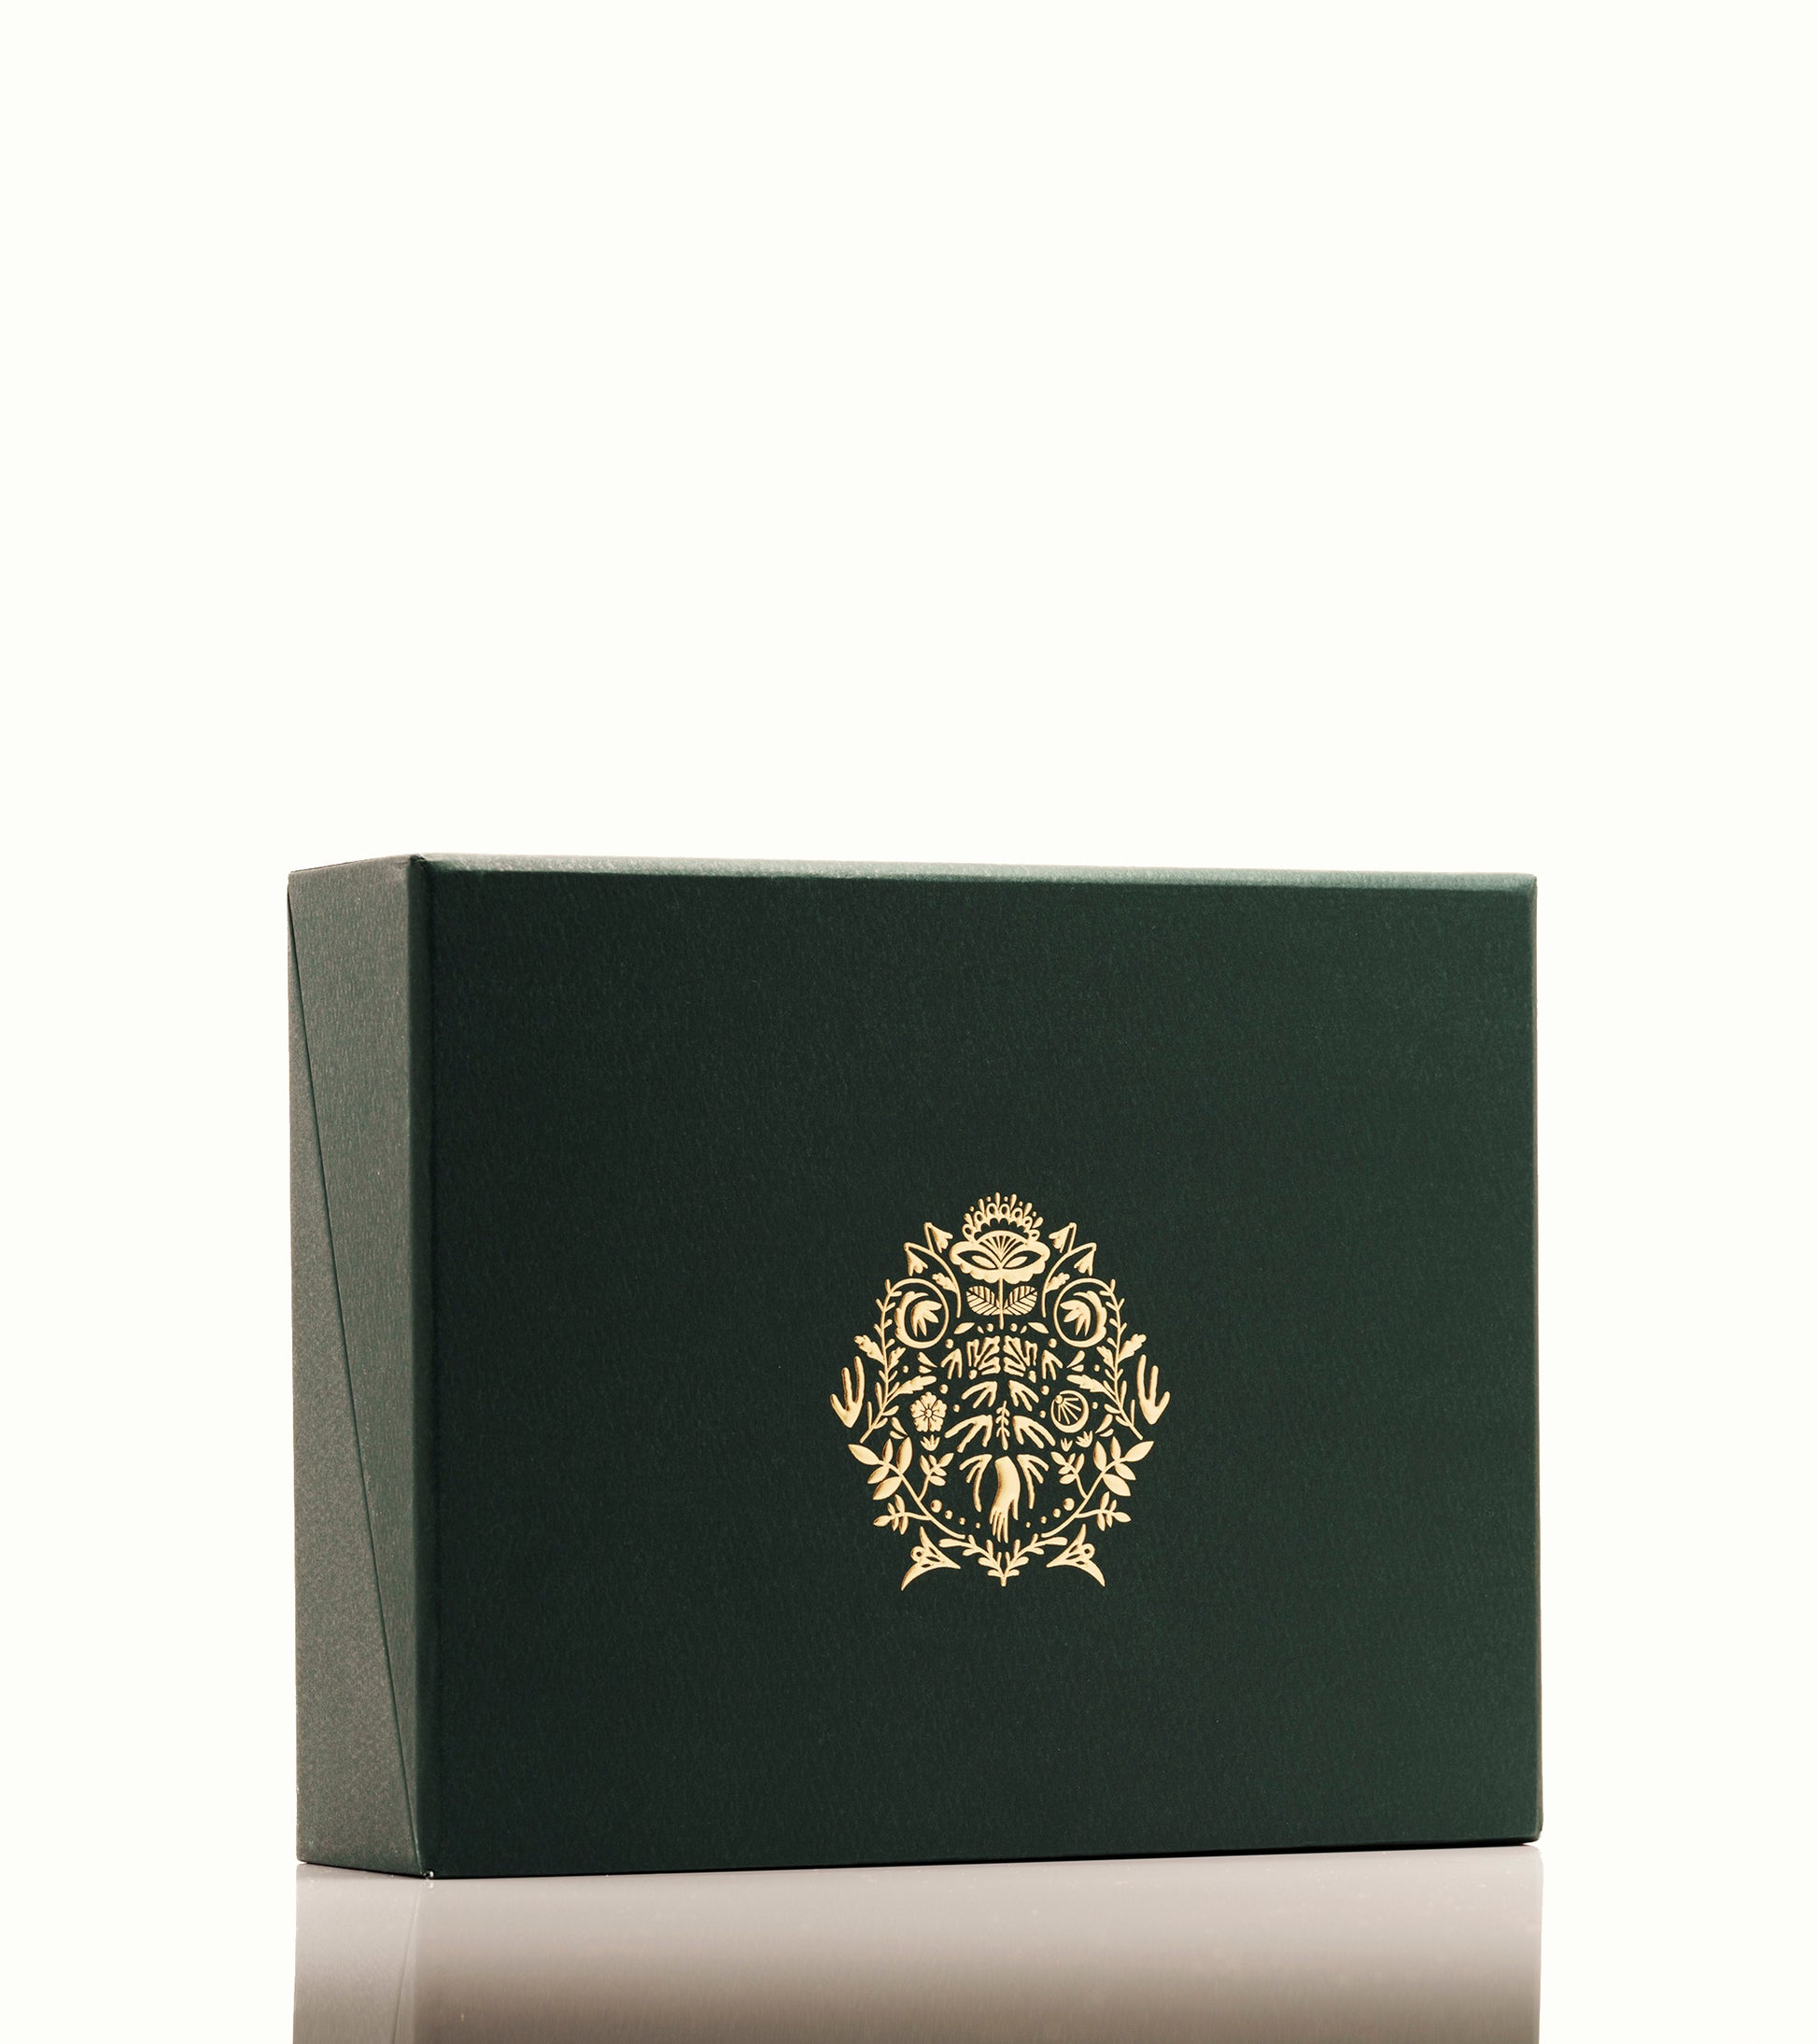 Image of the Nocturnal Skincare box set. The lid is closed and shows the brand crest. The crest is made up of Japanese and Scandinavian design elements. The box is dark green and the crest is metallic gold. 